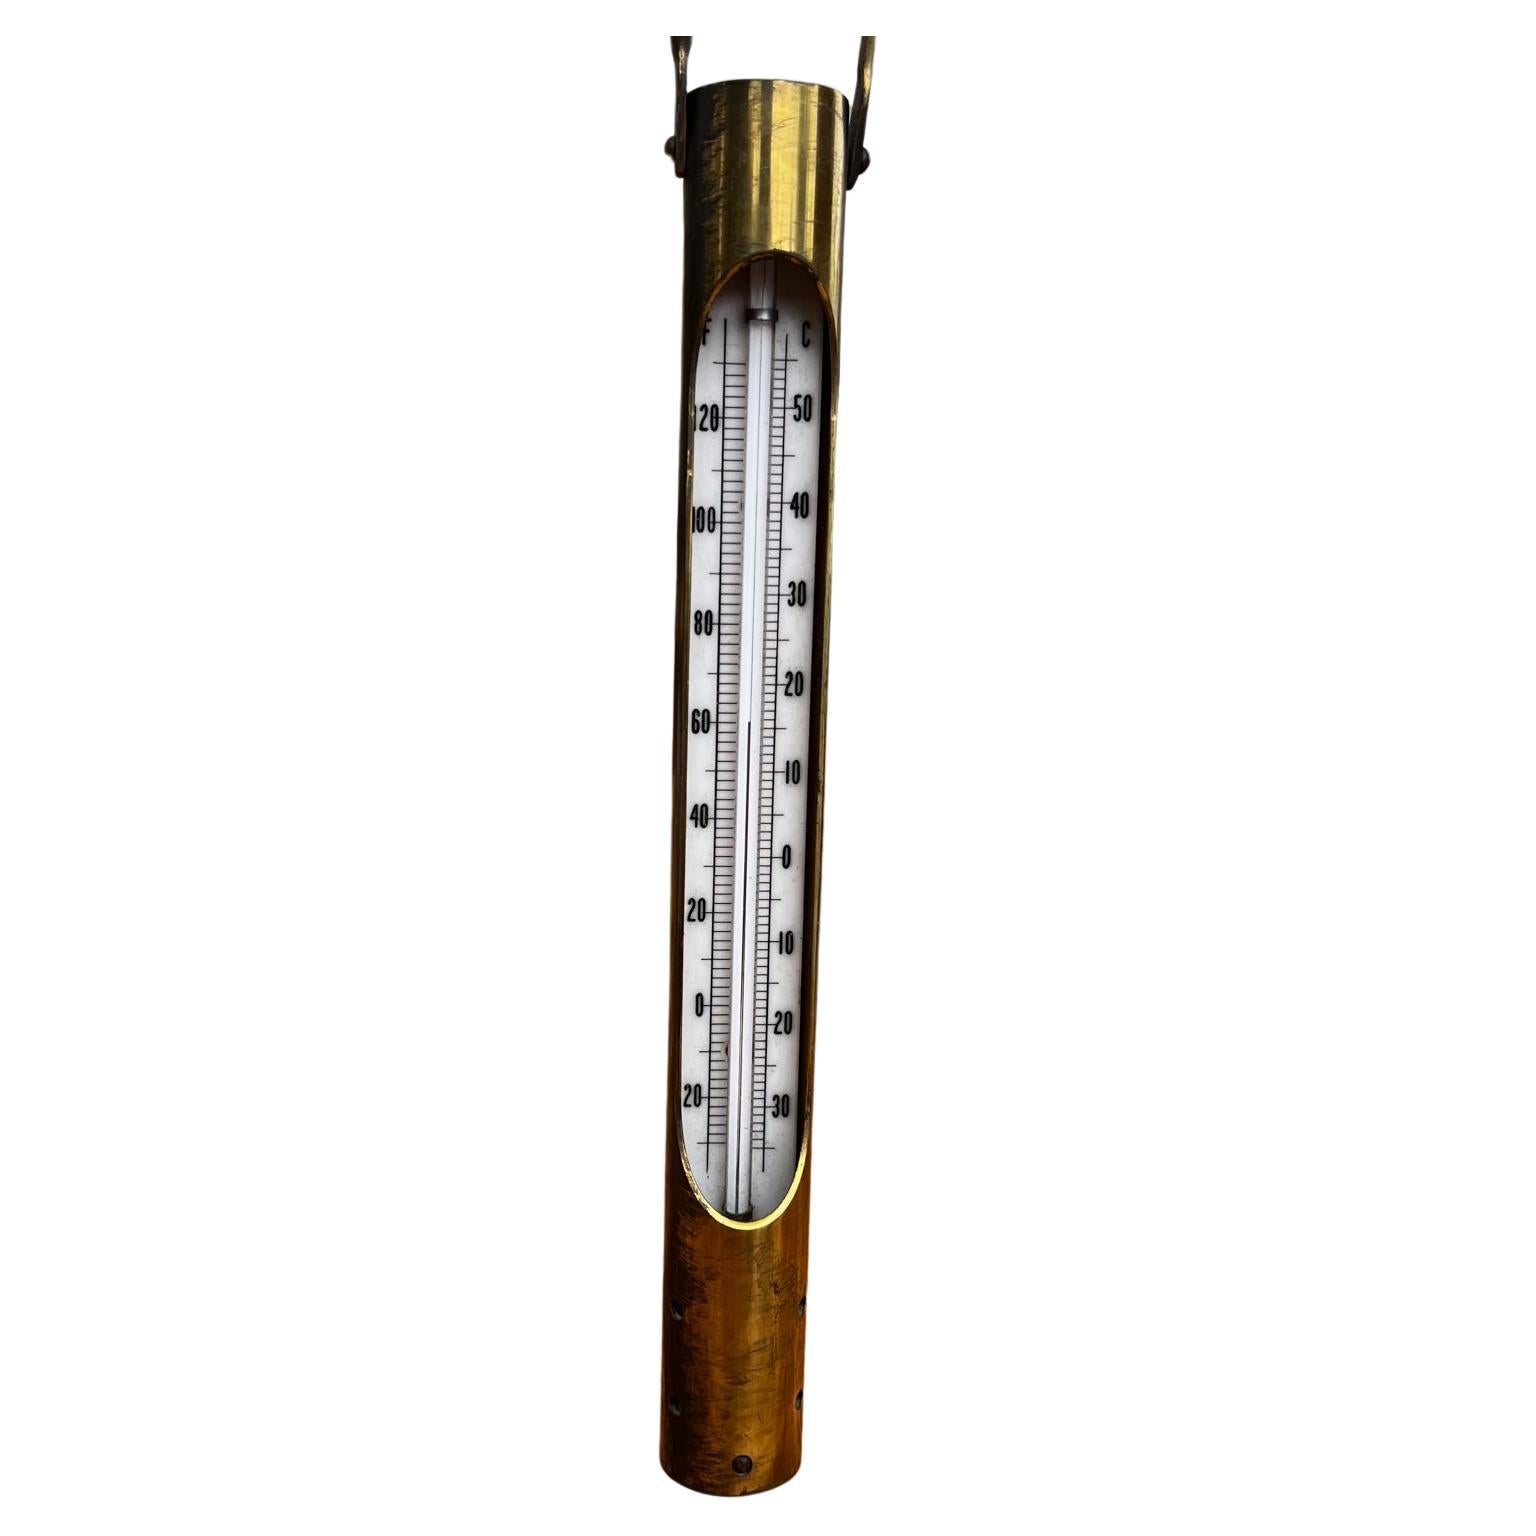 Brass Temperature Gauge
1960s Modern Decorative Brass Hanging Temperature Thermometer Gauge
Solid Brass and Cork
10 tall 3.5 tall with handle x 1.13 in diameter
Preowned original vintage patinated condition unrestored.
Review images provided.